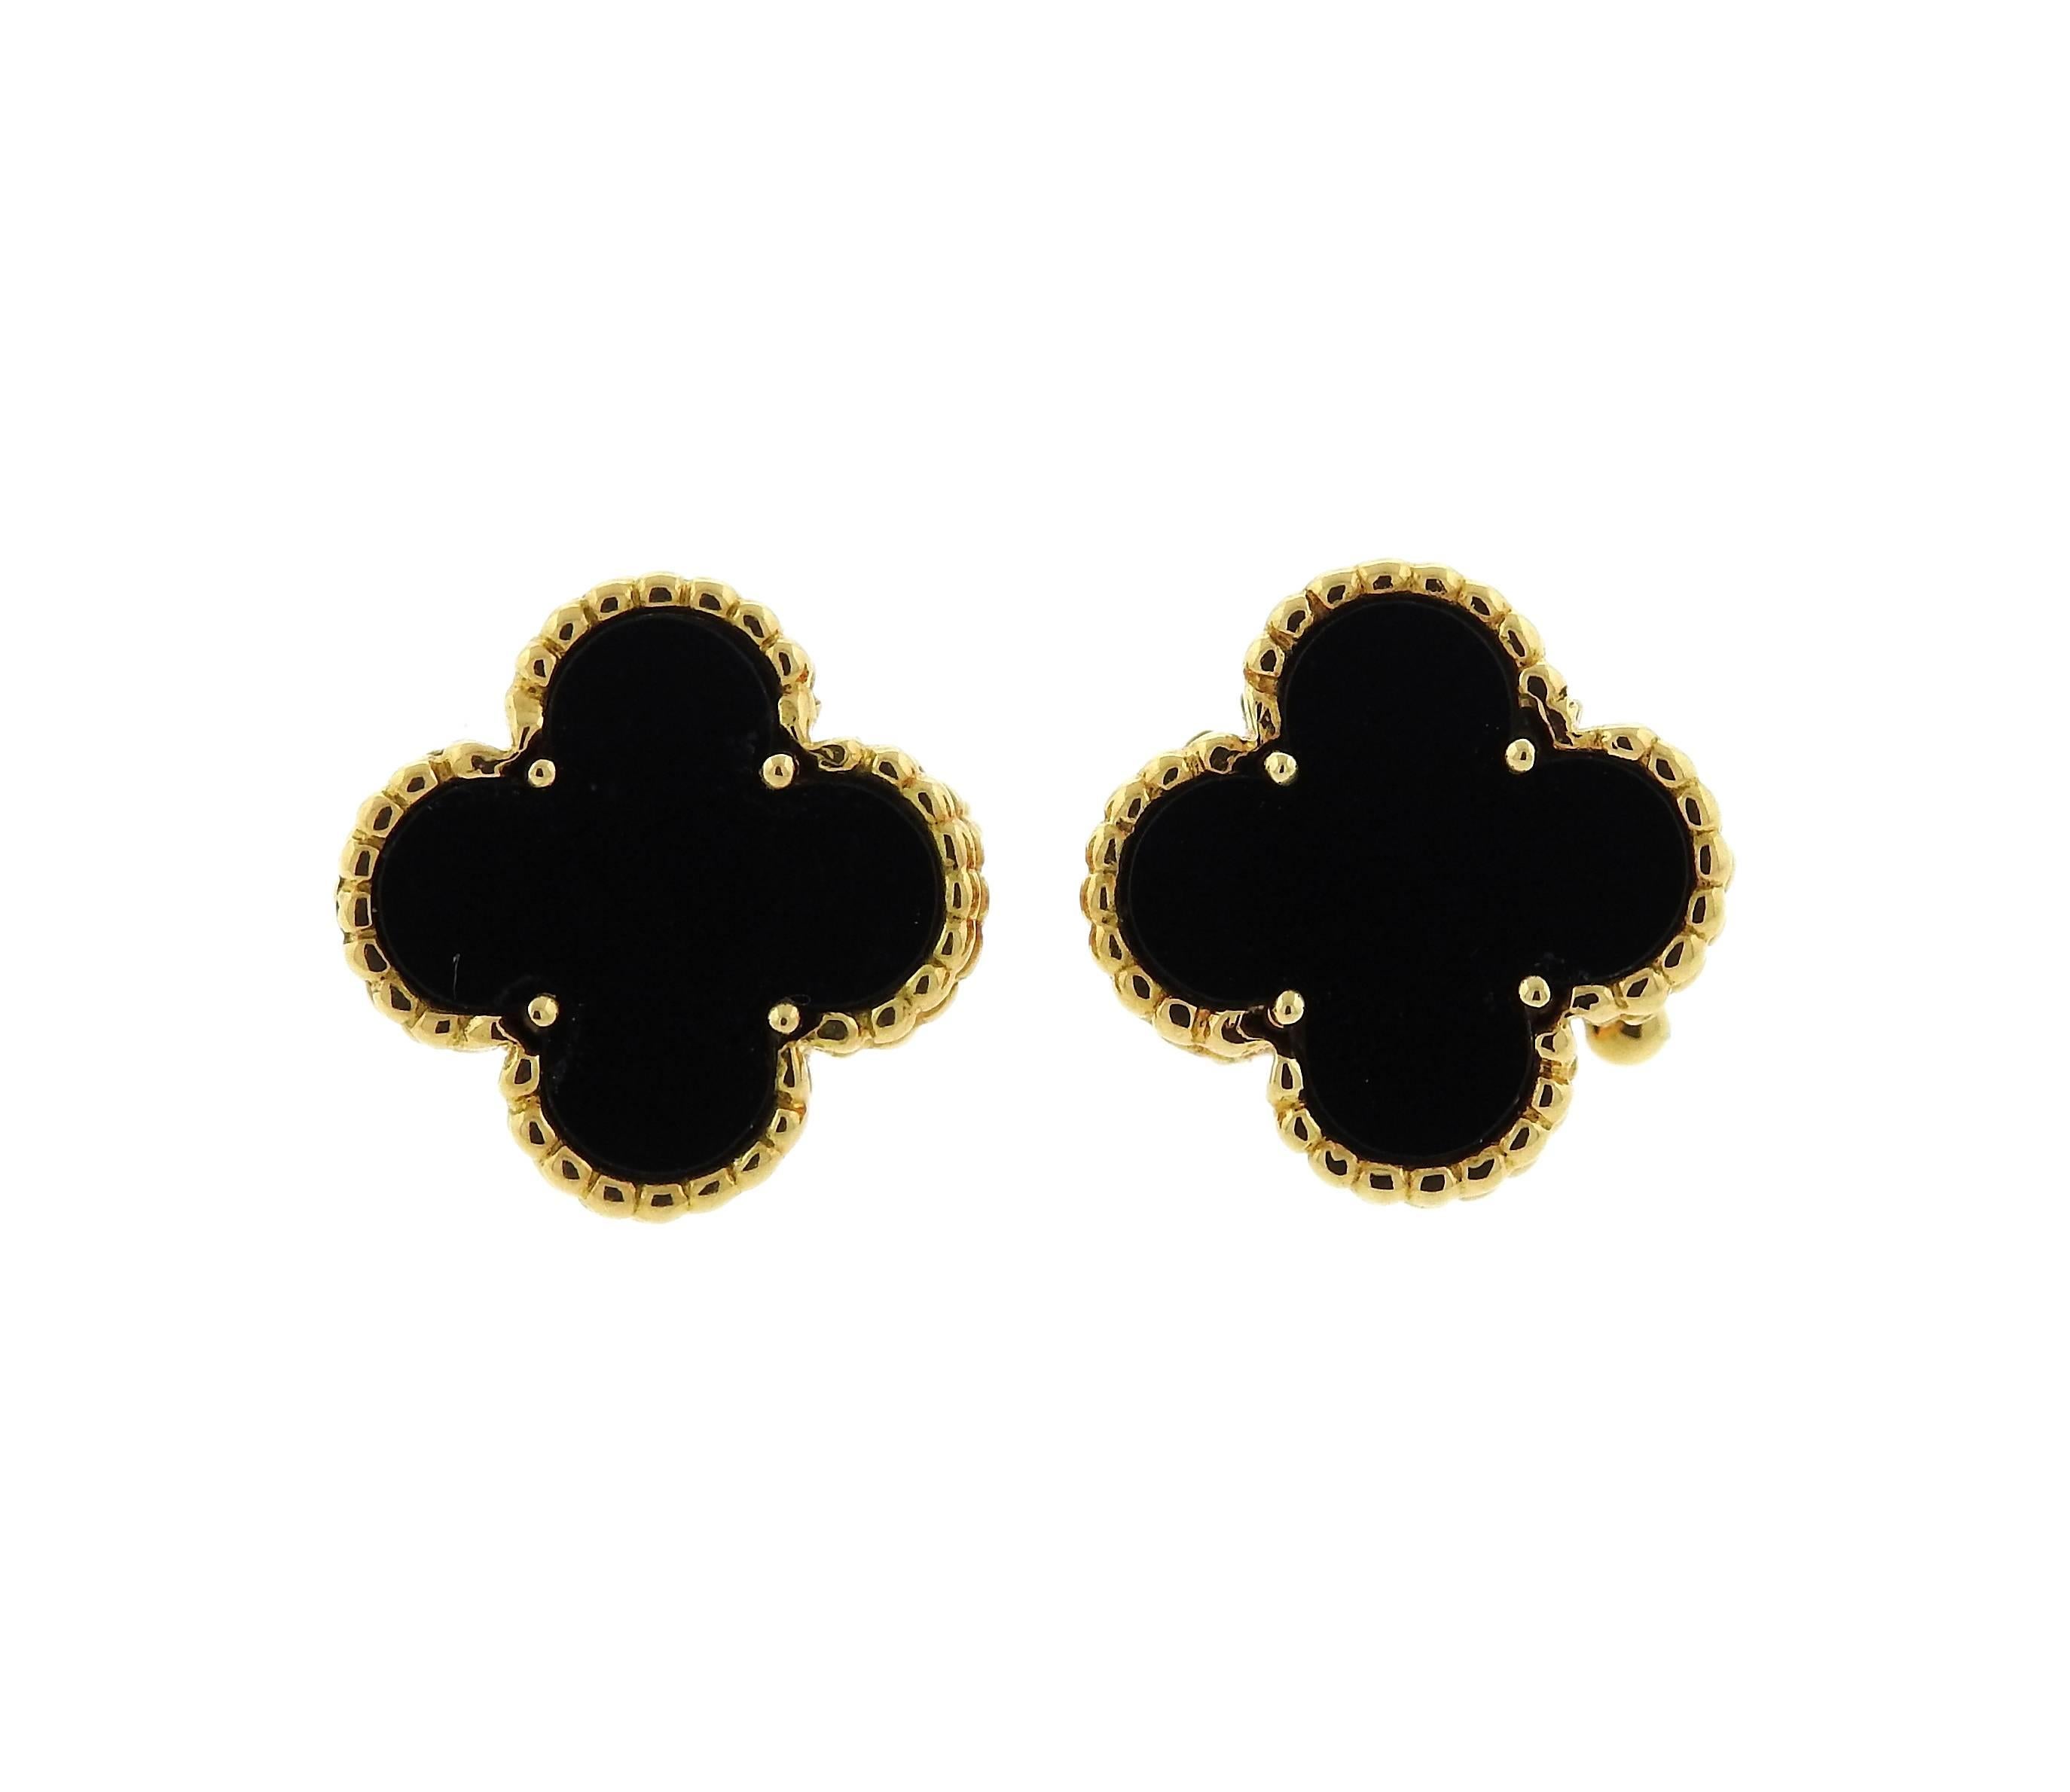 Pair of iconic 18k yellow gold clover earrings, crafted by Van Cleef & Arpels for signature Vintage Alhambra collection, set with onyx. Earrings are 15mm x 15mm . Marked: CL24044, VCA, 750. Weight - 8.8 grams 
Retail $4250